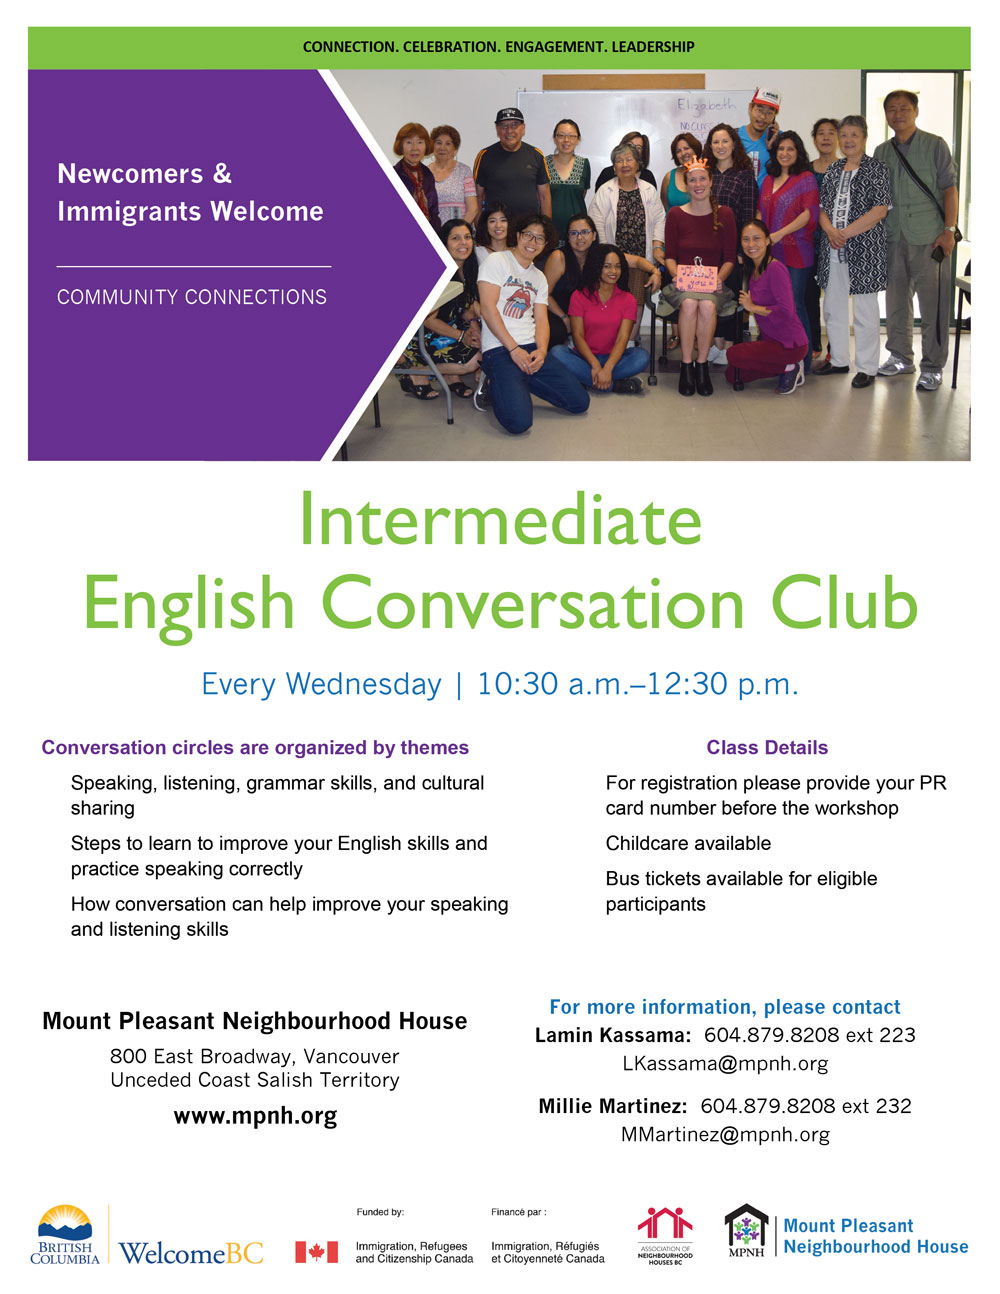 An image of the poster with program details, featuring a photo of a diverse and smiling group of intermediate students with instructors